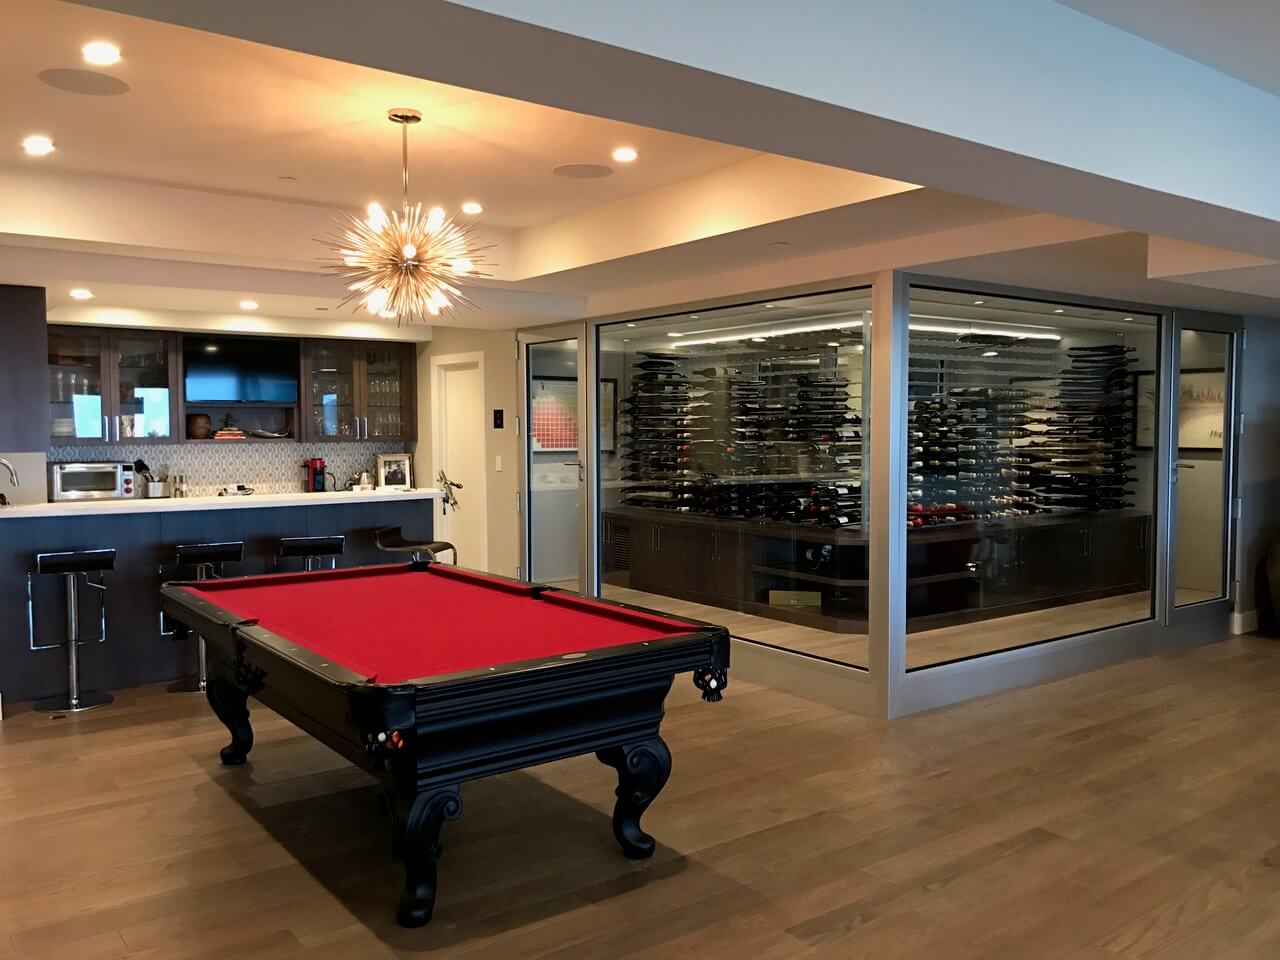 Gameroom, bar, and chilled wine room